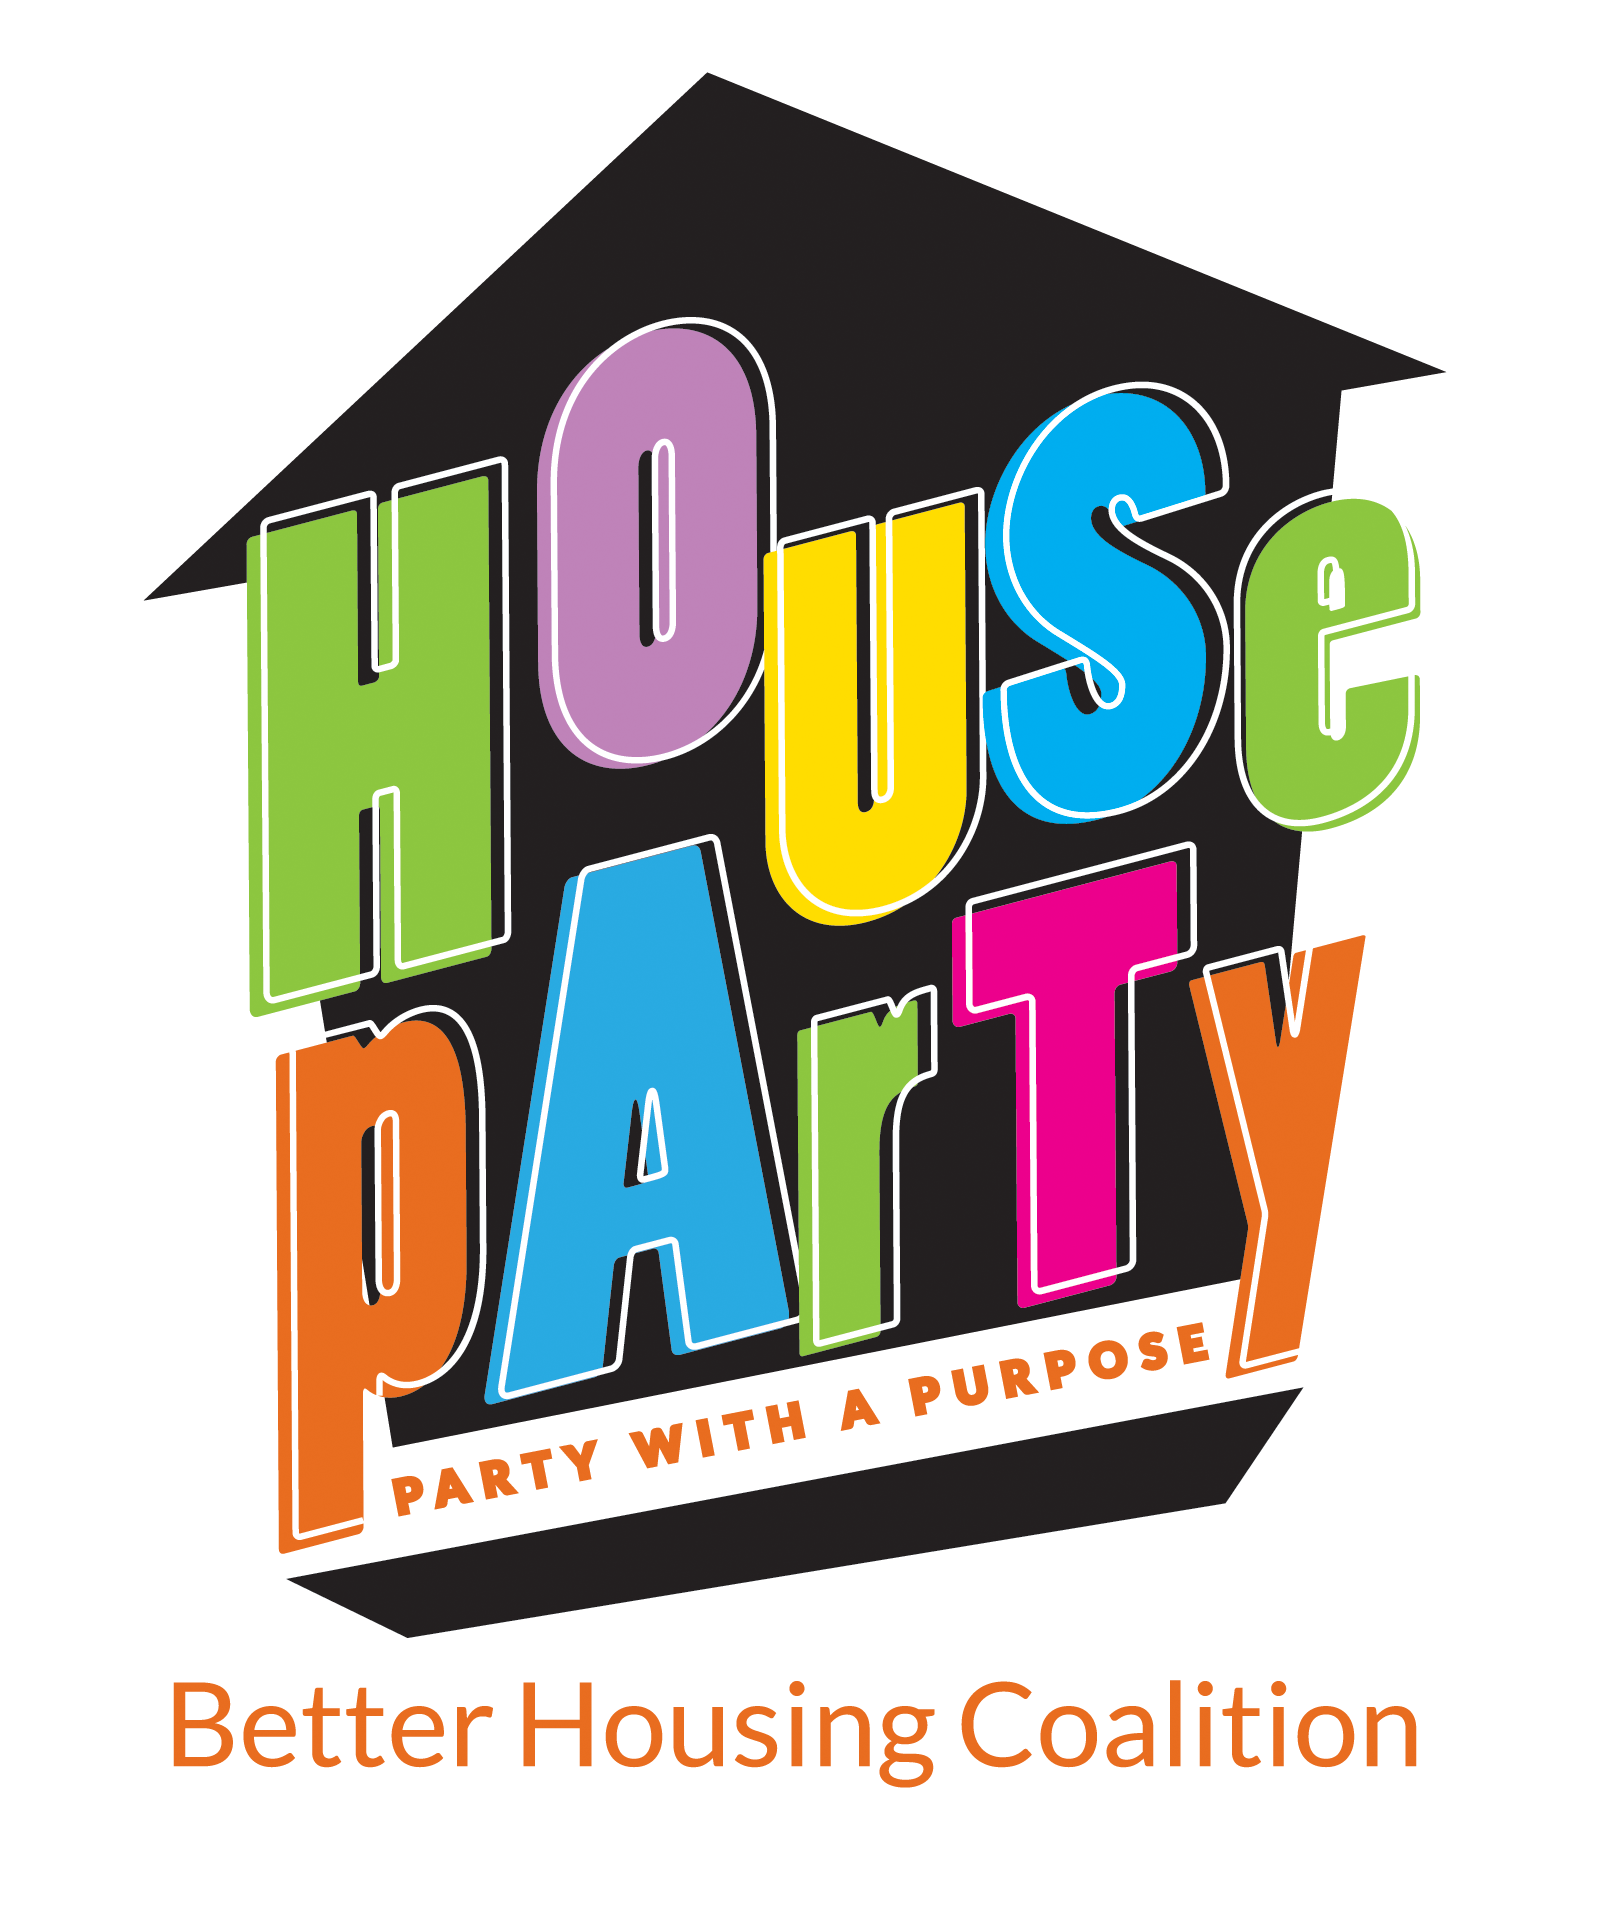 Tickets clipart admission. House party with a